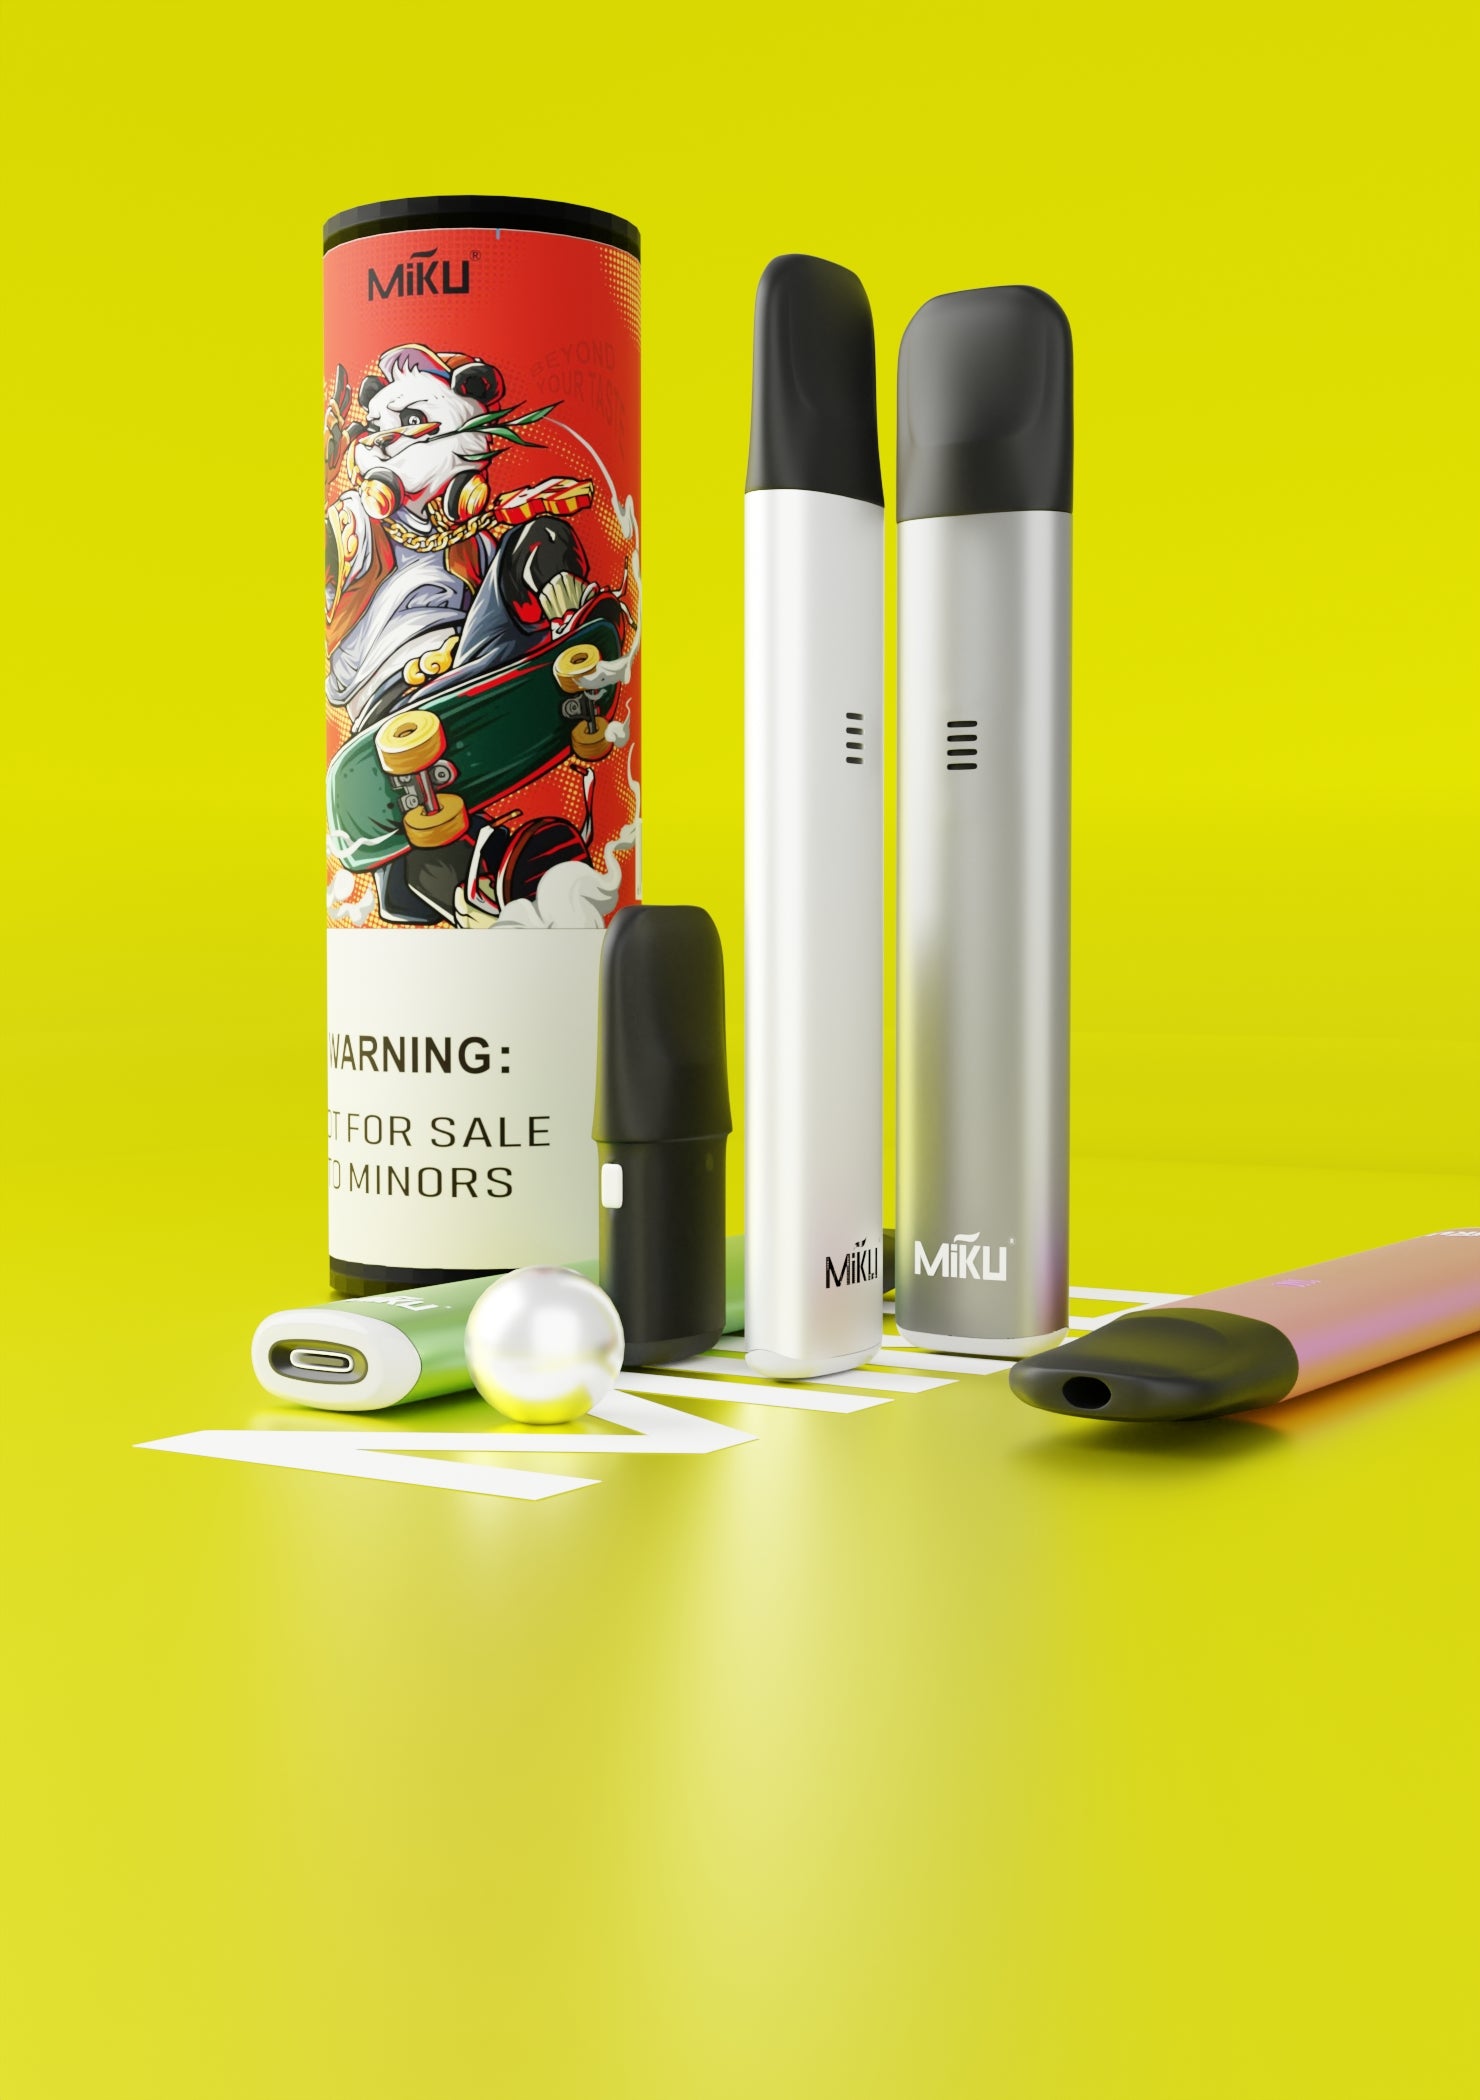 Miku 5th E-Cigarette Pen: Elevating Vaping to a Whole New Level! – Hollecig